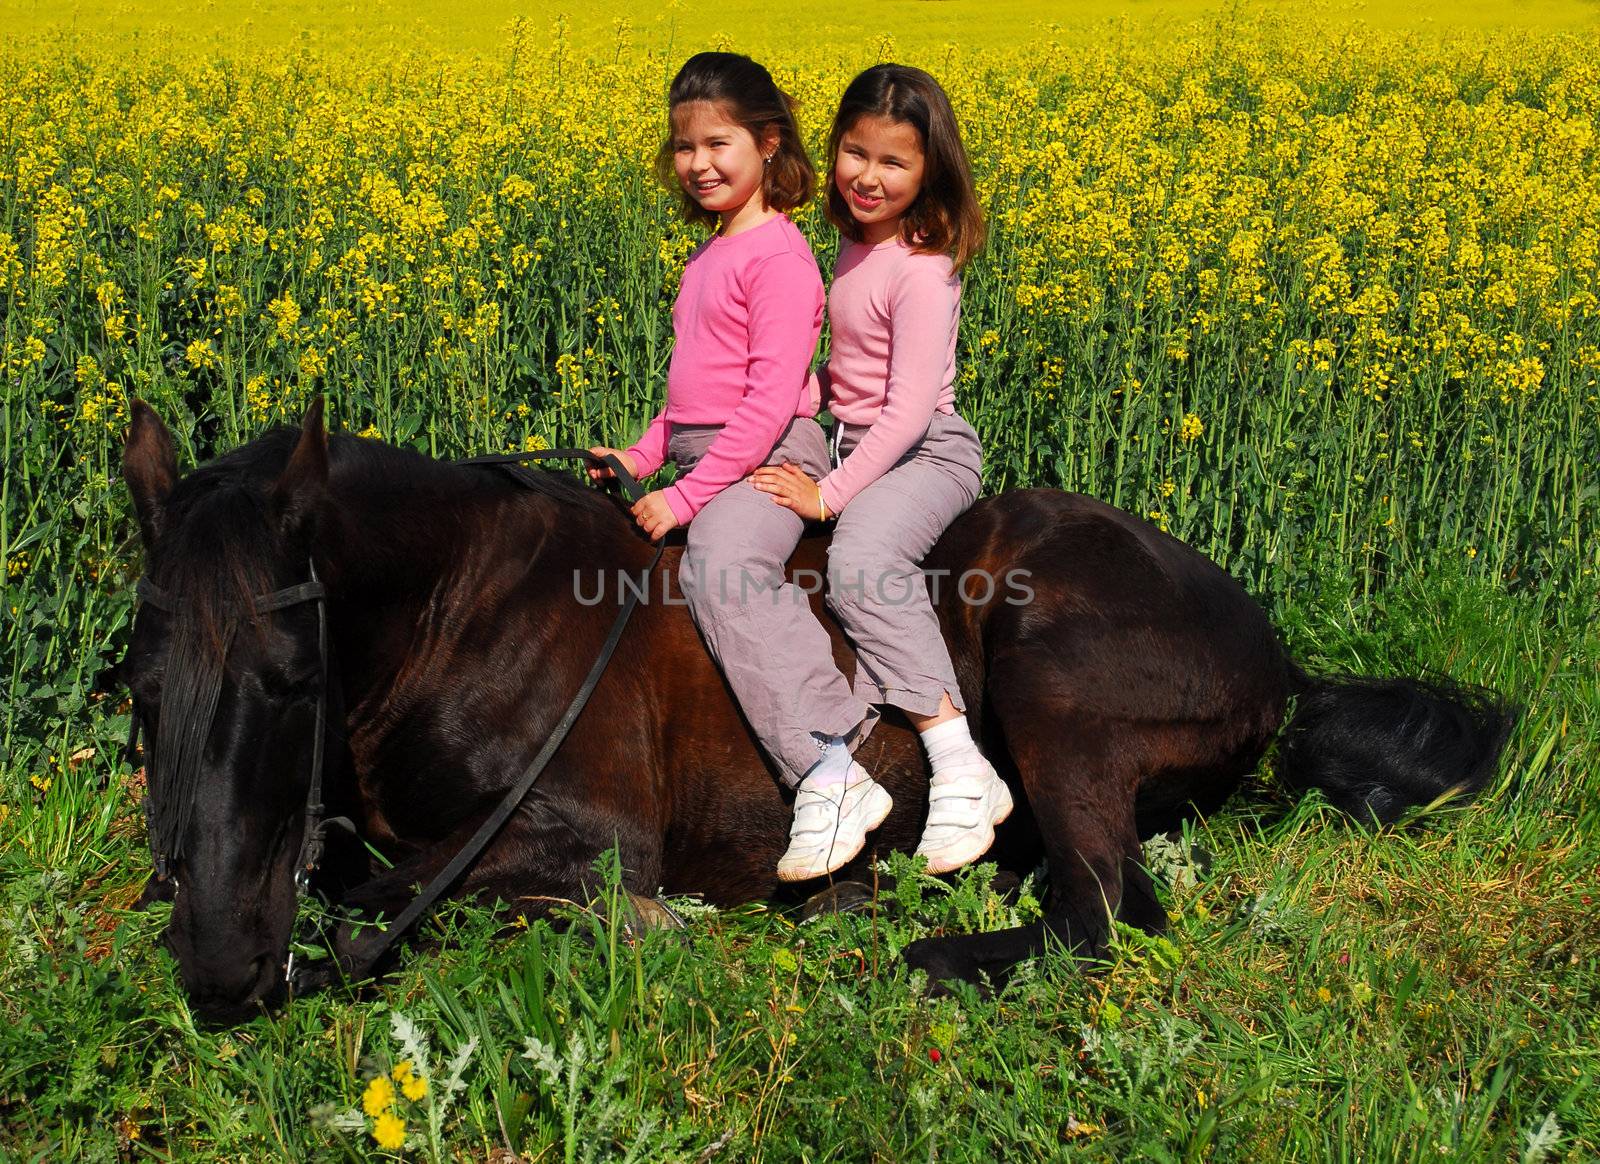 twins and horse laid down by cynoclub